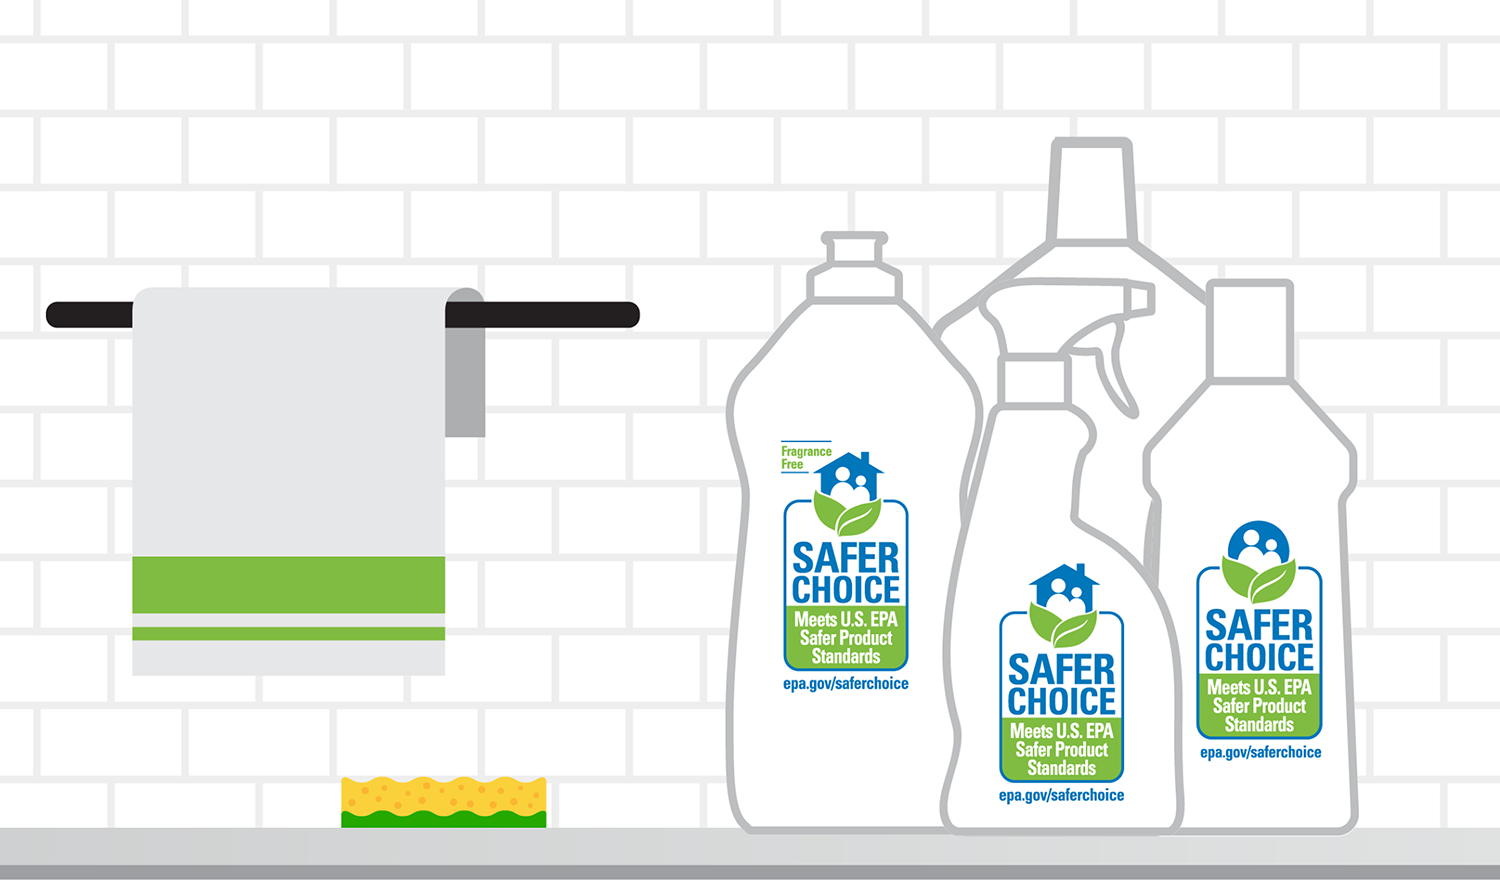 Illustration of cleaning products with the Safer Choice logo sitting on a countertop next to a sponge and towel rack